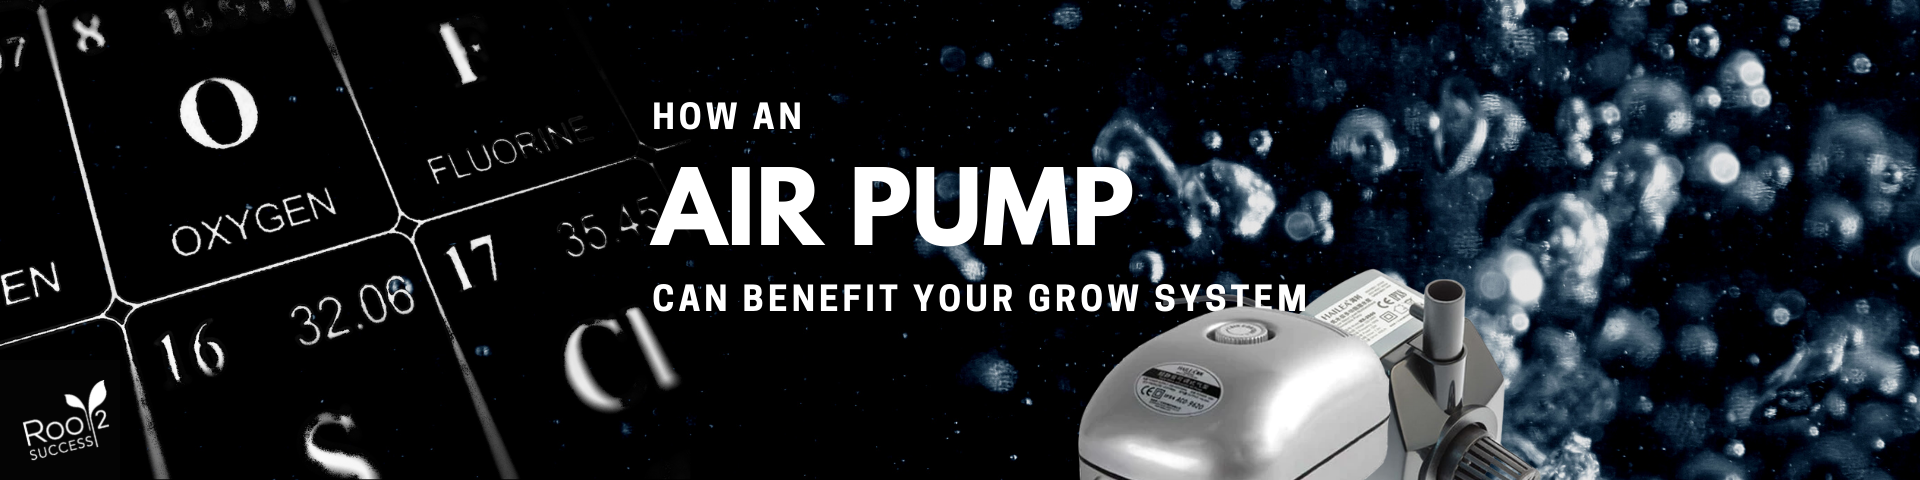 How an air pump can benefit your grow system